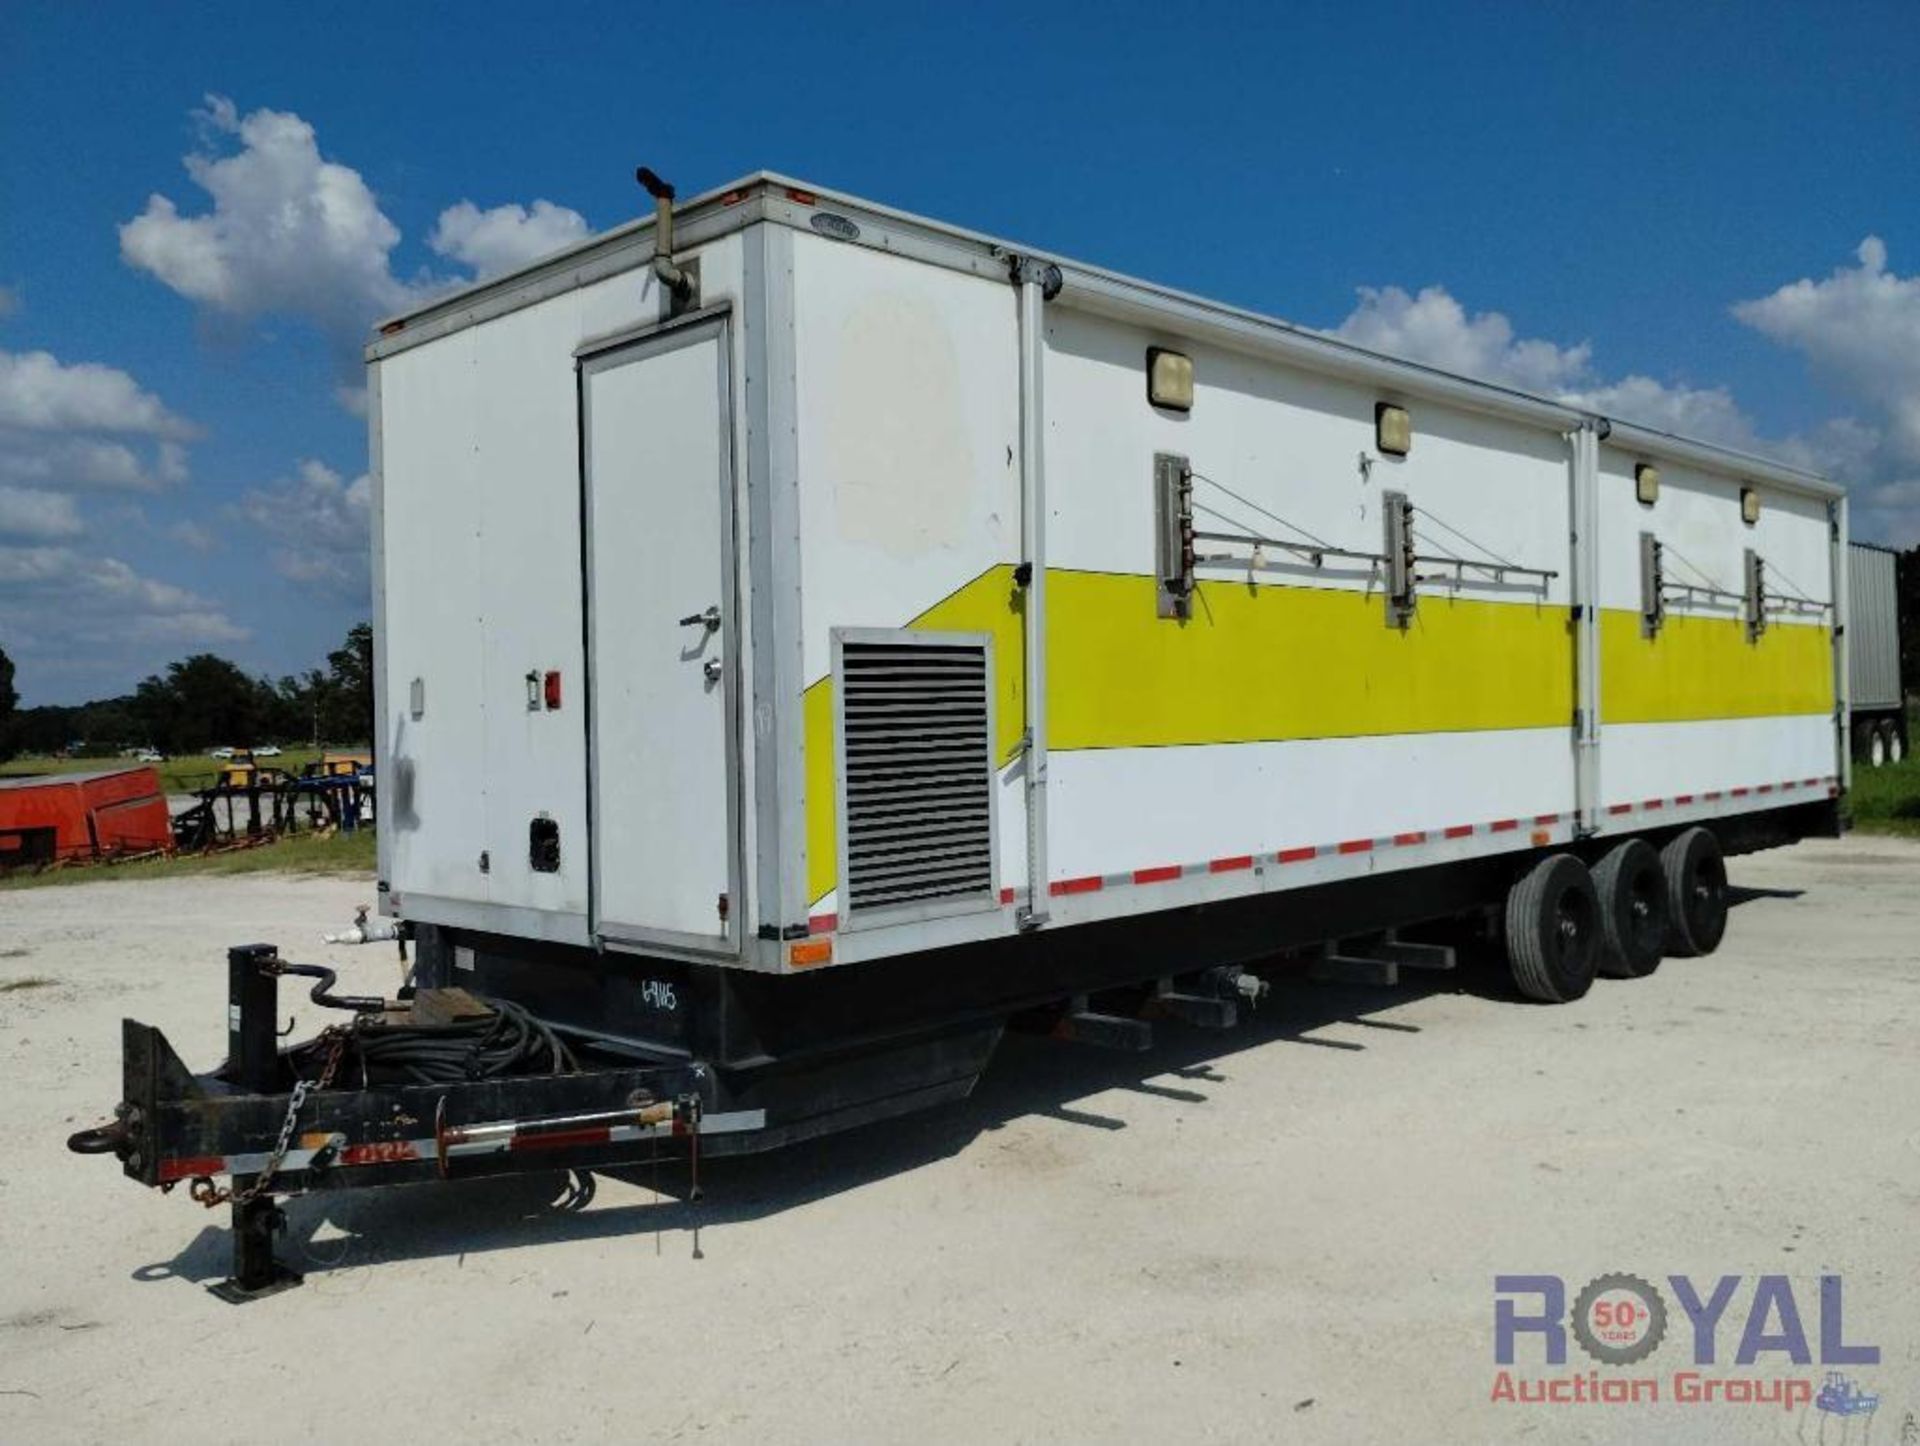 Fire/Rescue Portable Bathroom and Shower Trailer - Image 2 of 50